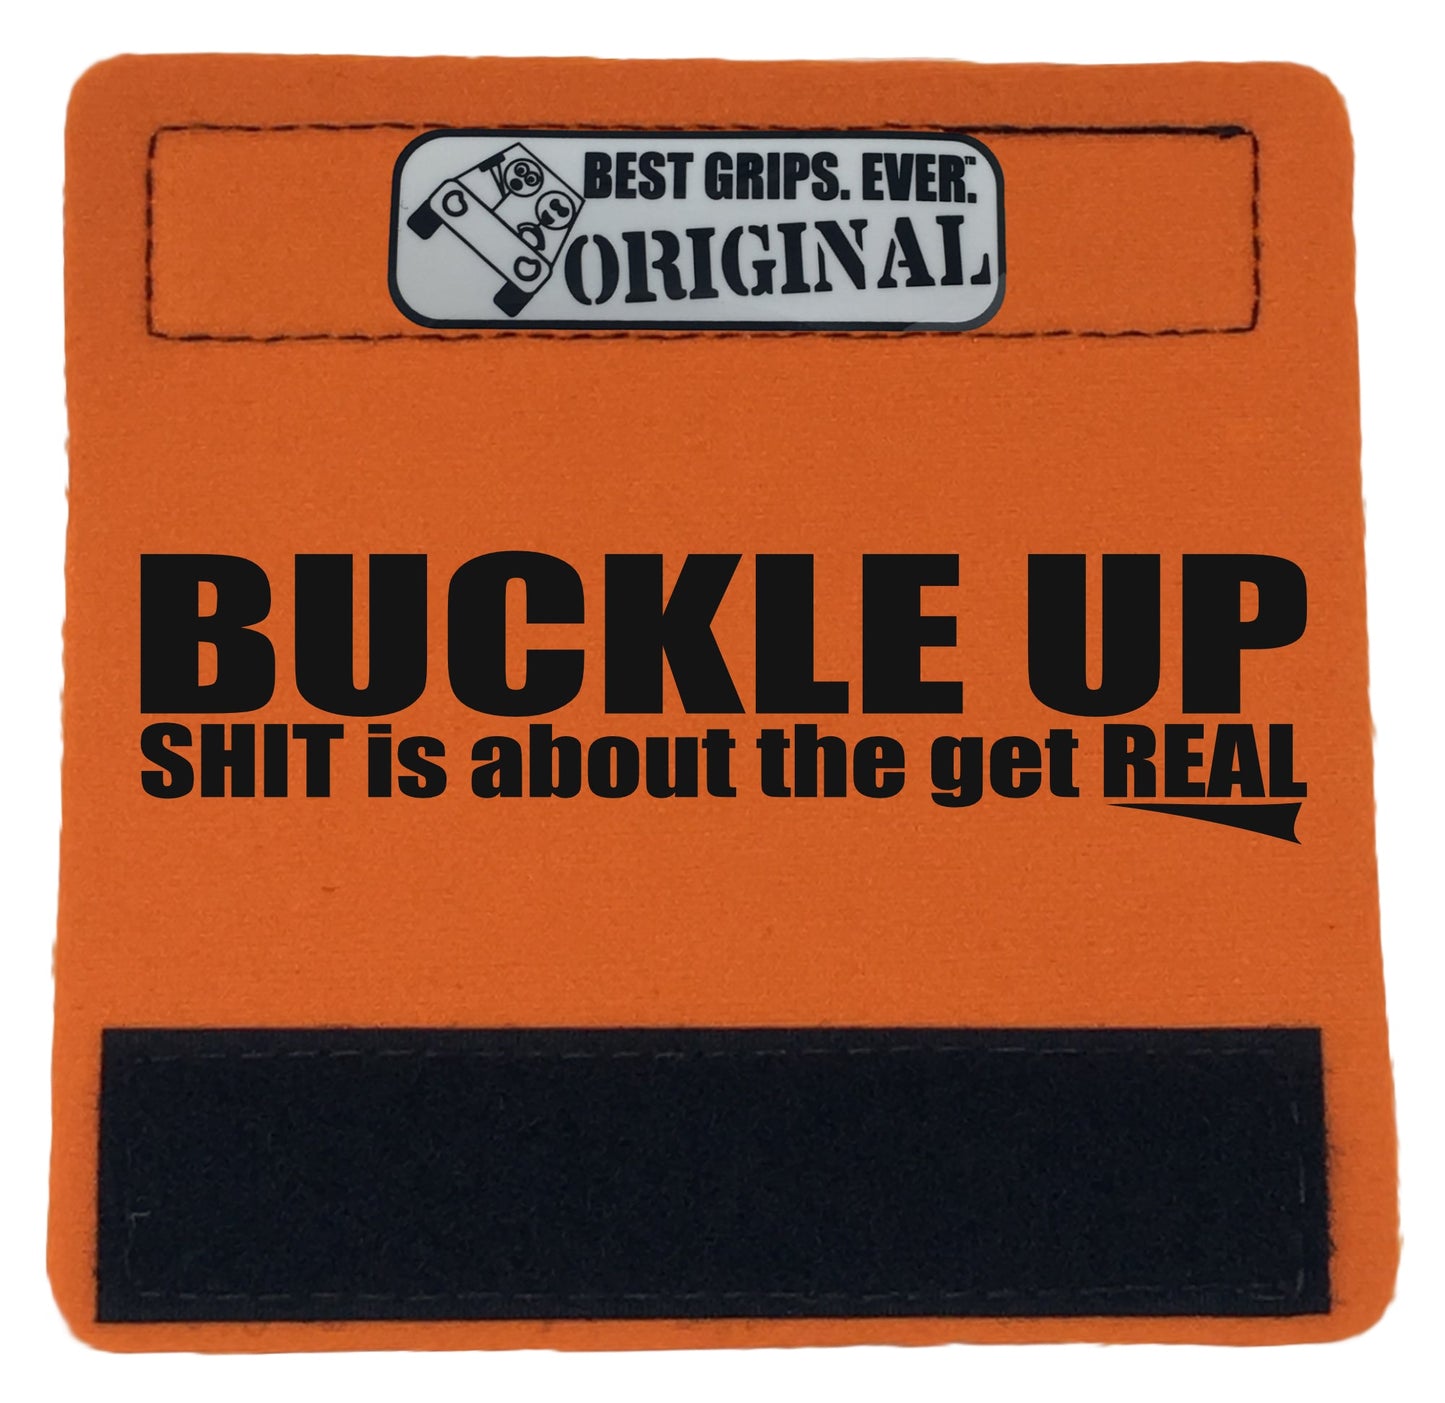 The Buckle Up Grip. - BEST GRIPS. EVER.®